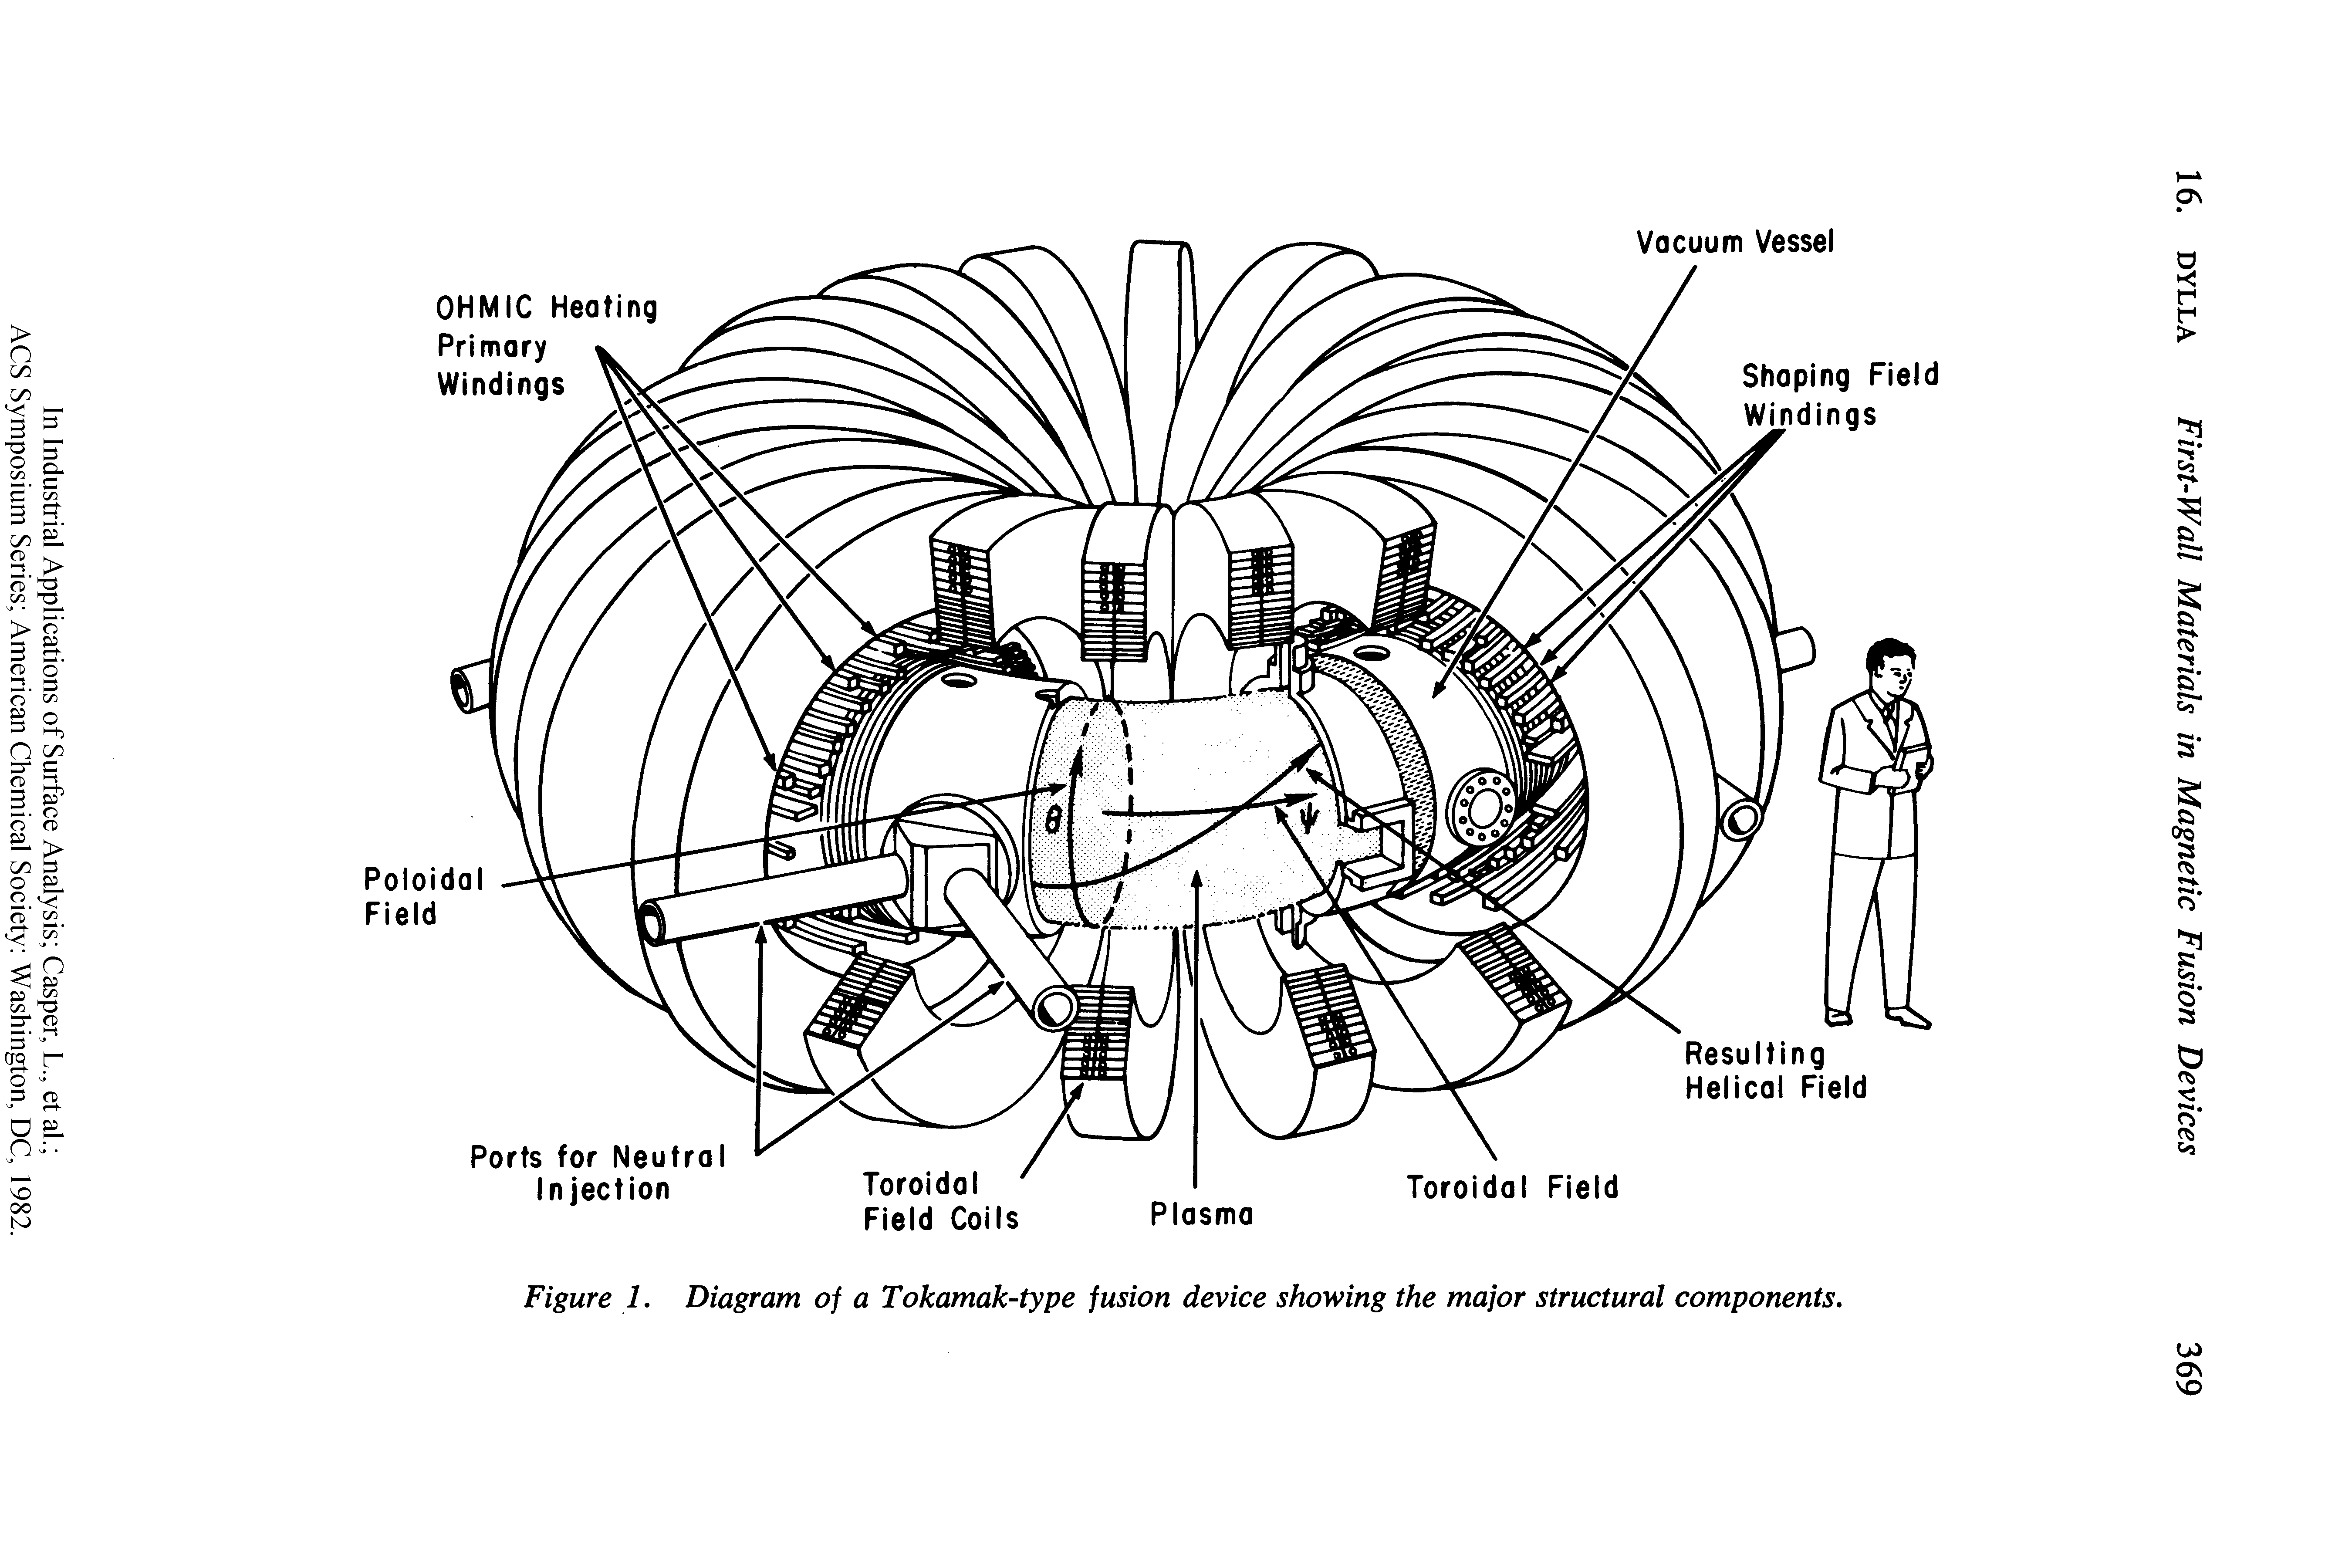 Figure 1. Diagram of a Tokamak-type fusion device showing the major structural components.